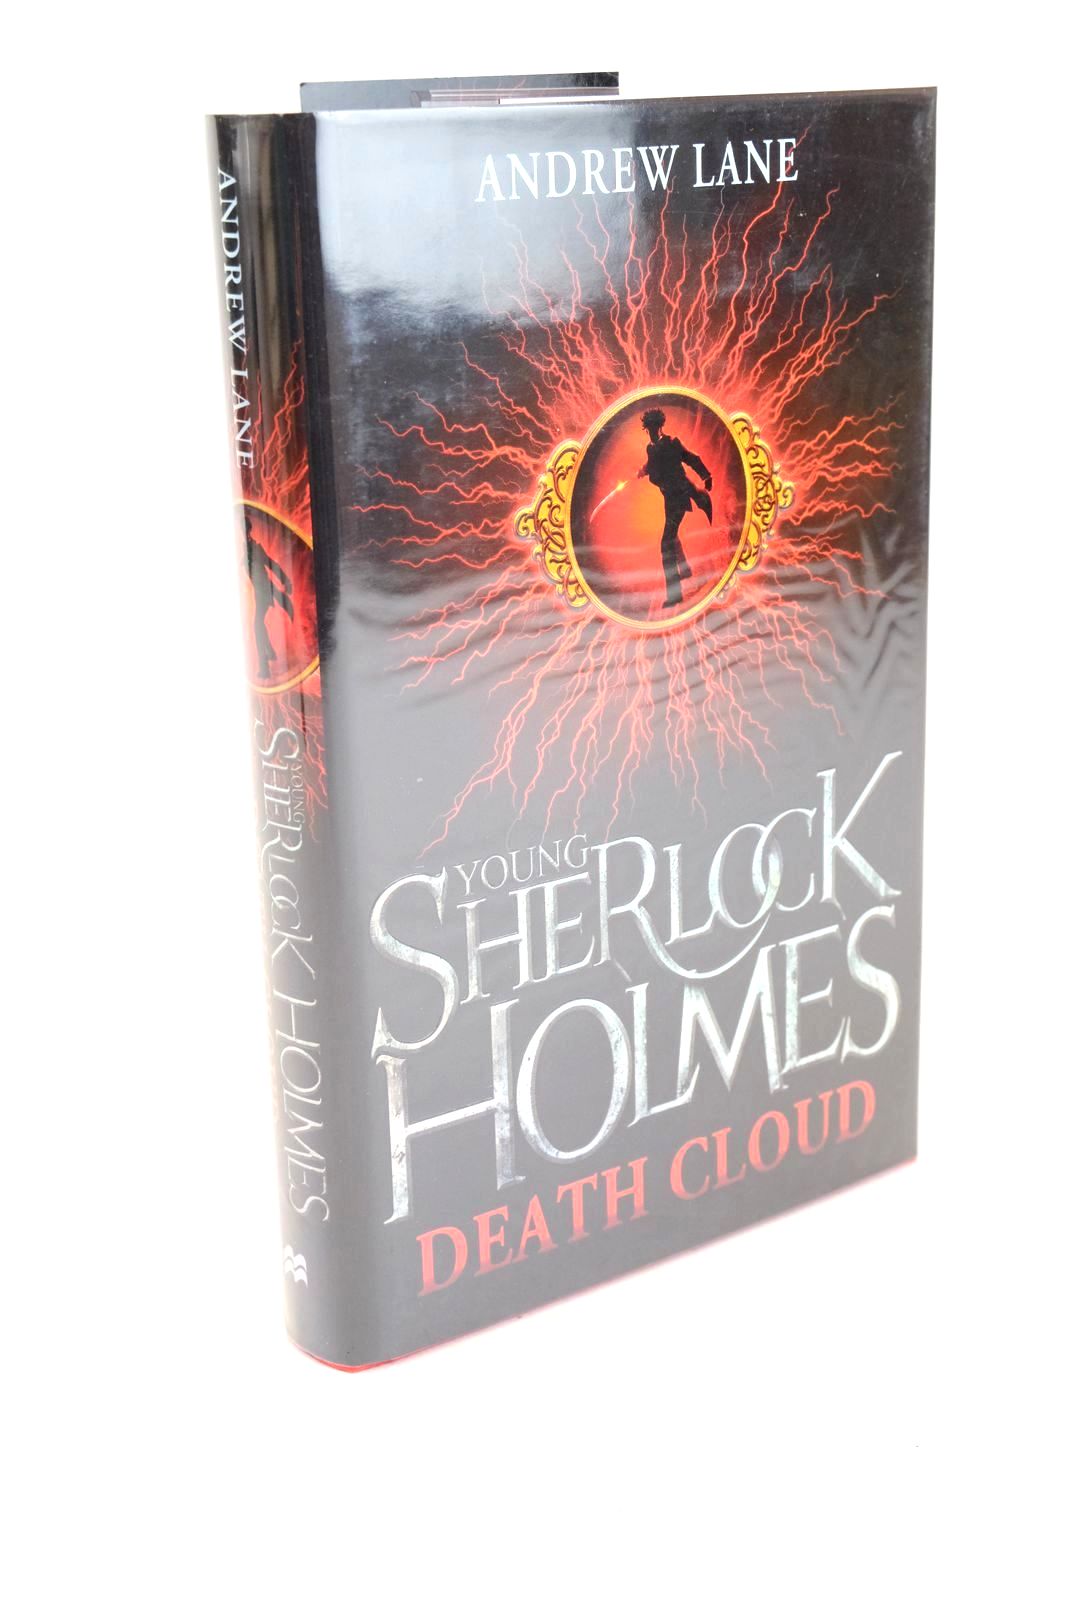 Photo of YOUNG SHERLOCK HOLMES - DEATH CLOUD written by Lane, Andrew illustrated by Walker, Kev Hadley, Sam published by Macmillan Children's Books (STOCK CODE: 1325749)  for sale by Stella & Rose's Books